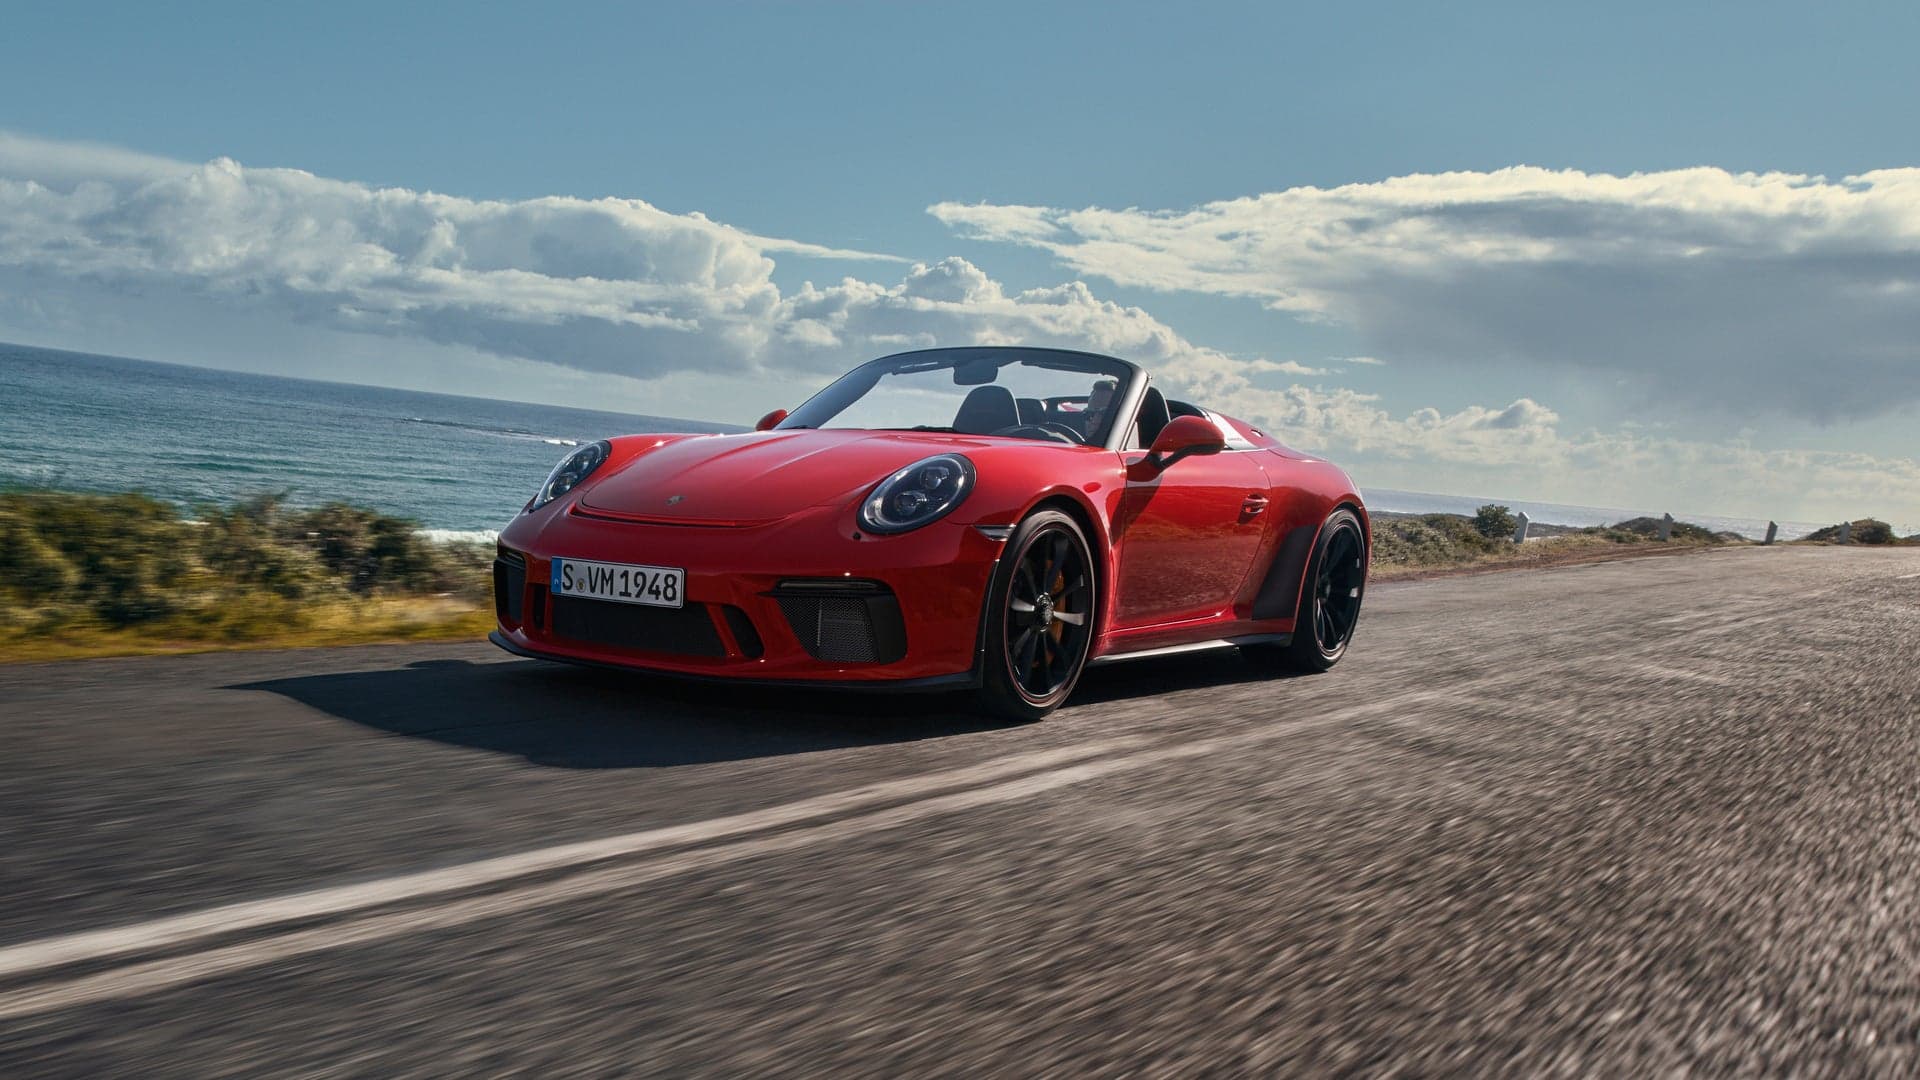 No More Than Two Identical Porsche 911 Sports Cars Are Built Every Year: Report